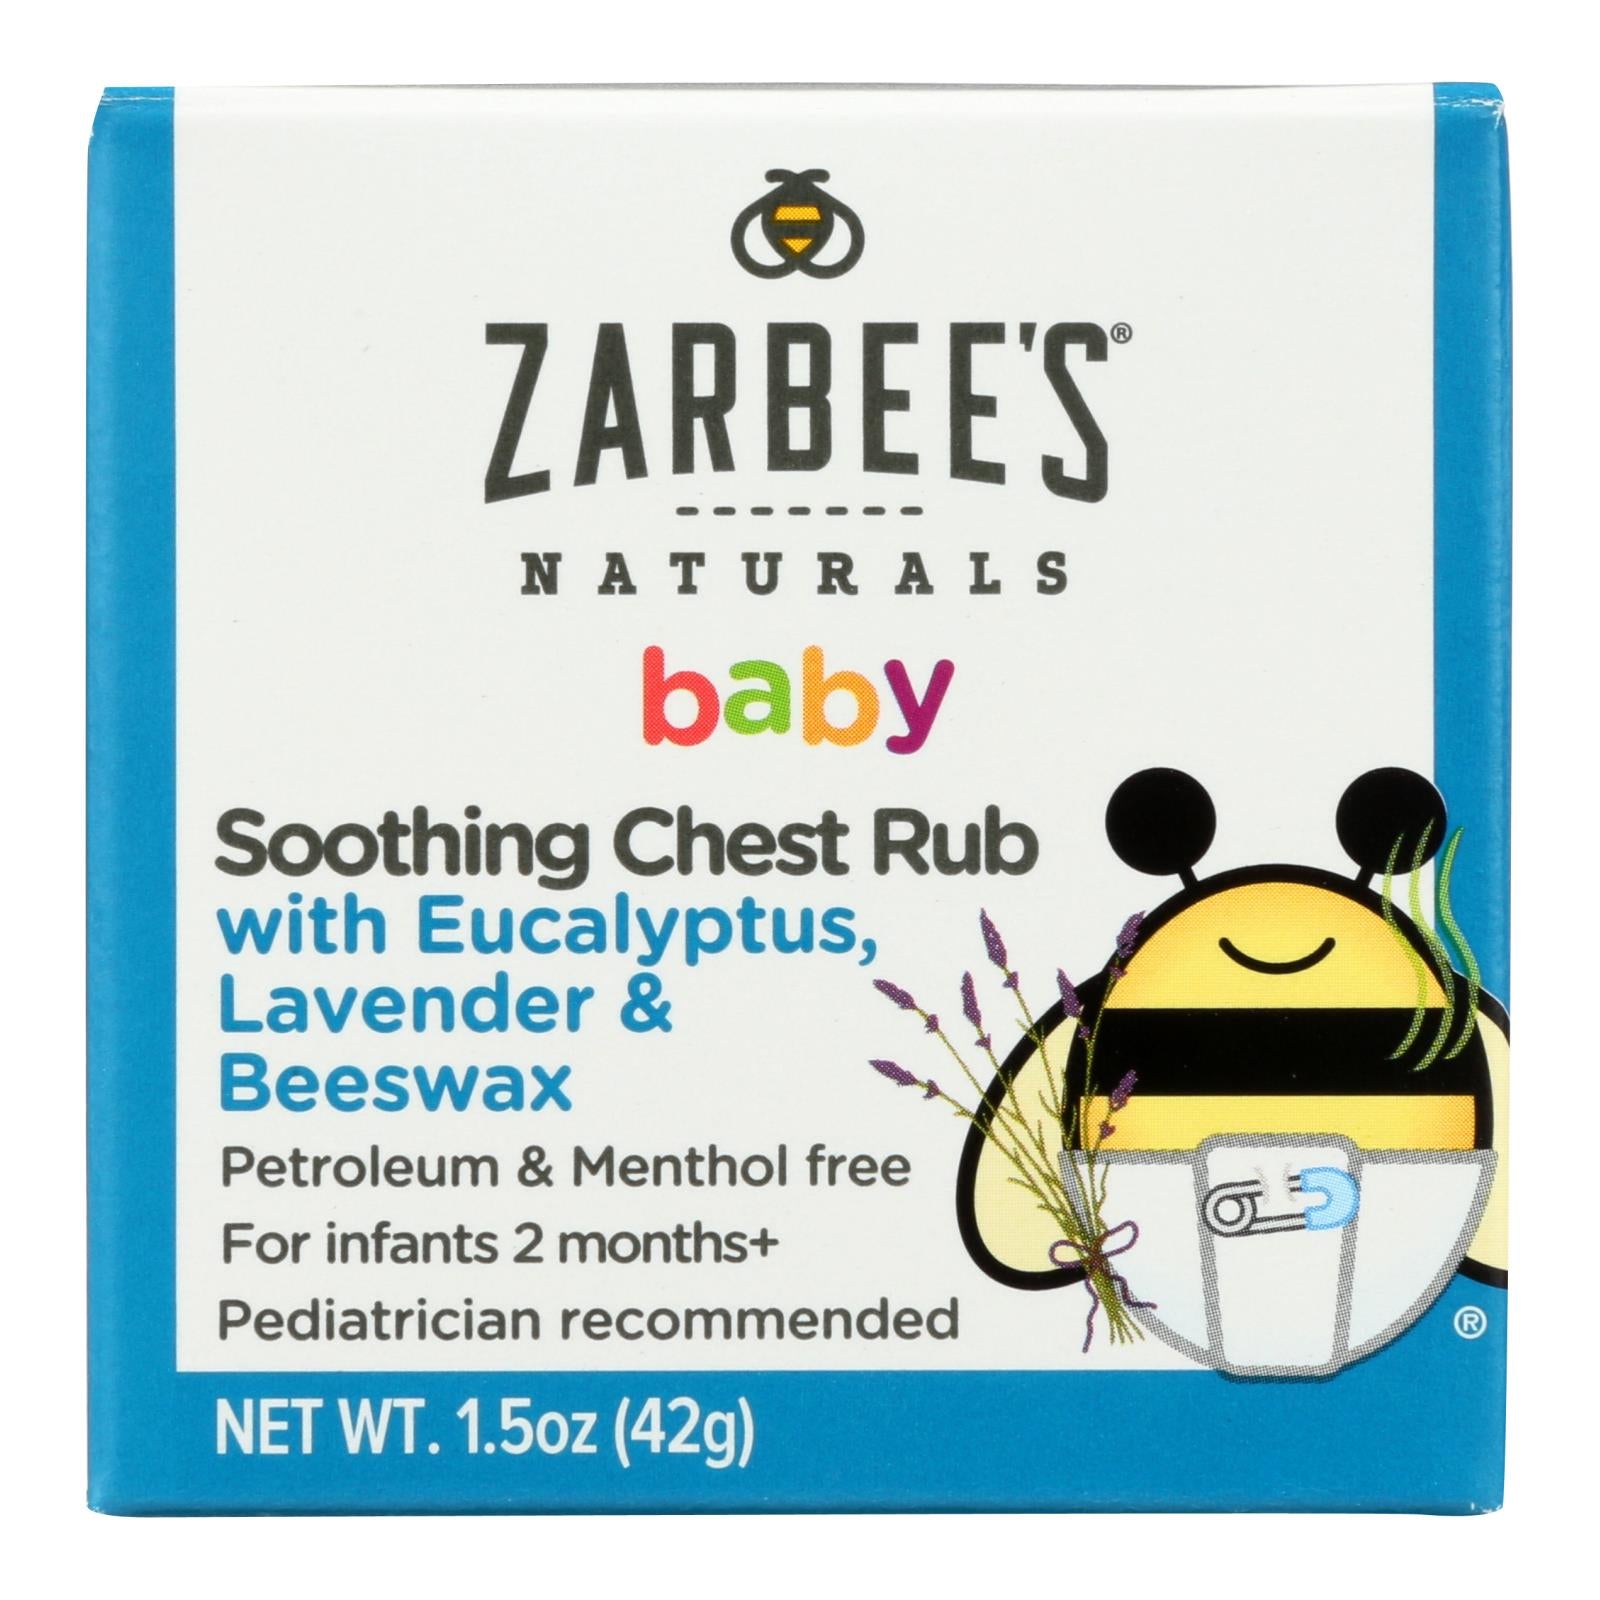 Zarbee's Natural Baby Soothing Chest Rub  - 1 Each - 1.5 OZ